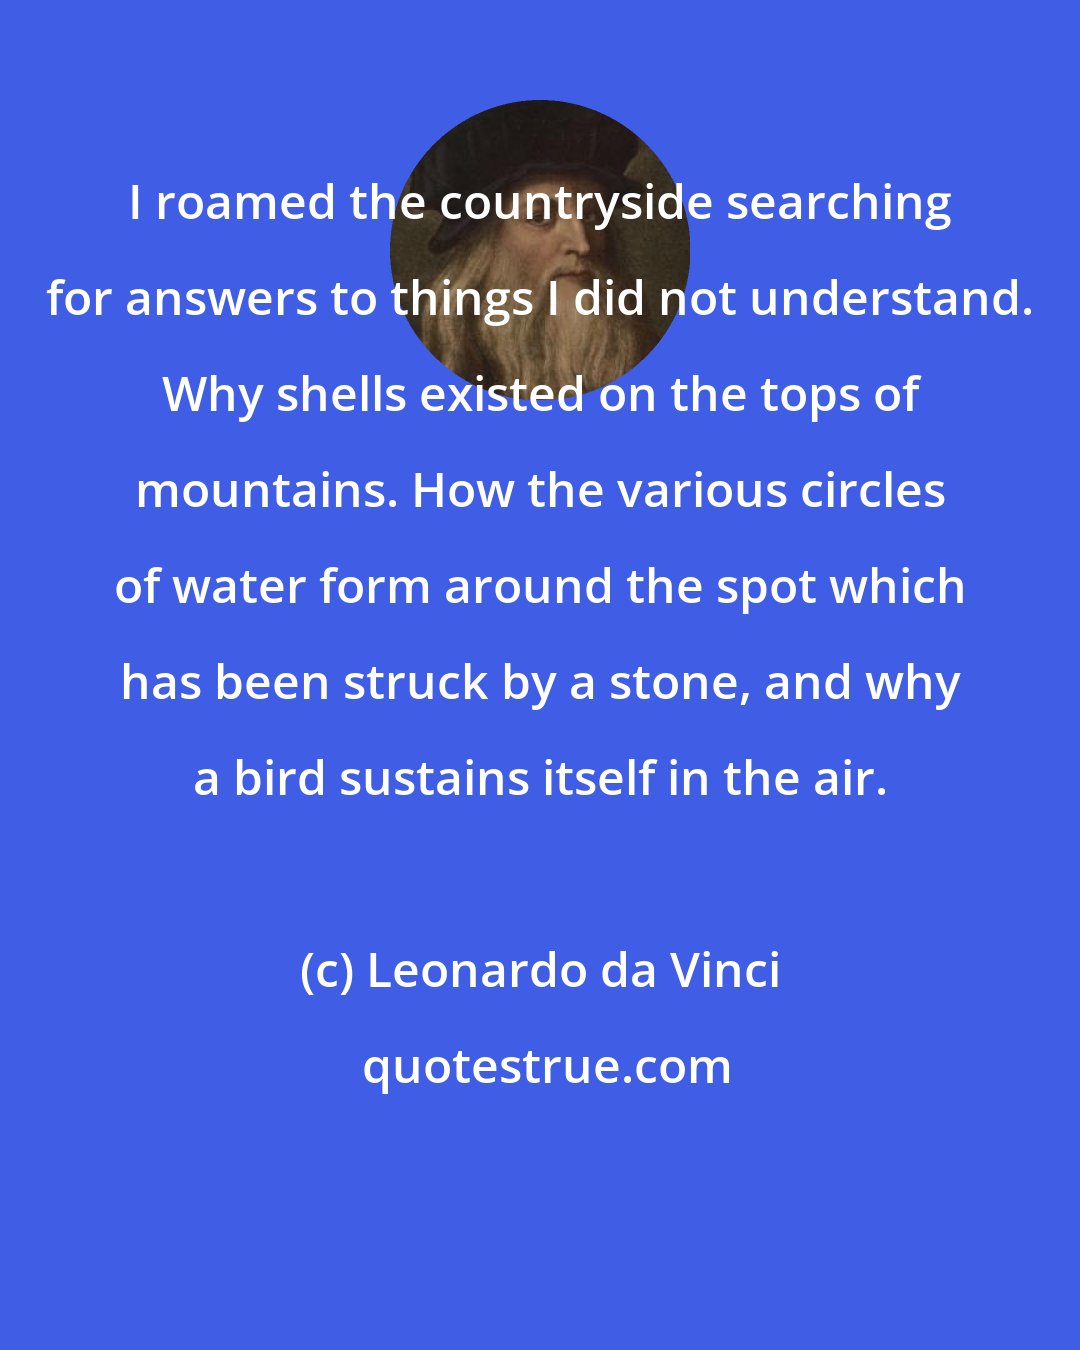 Leonardo da Vinci: I roamed the countryside searching for answers to things I did not understand. Why shells existed on the tops of mountains. How the various circles of water form around the spot which has been struck by a stone, and why a bird sustains itself in the air.